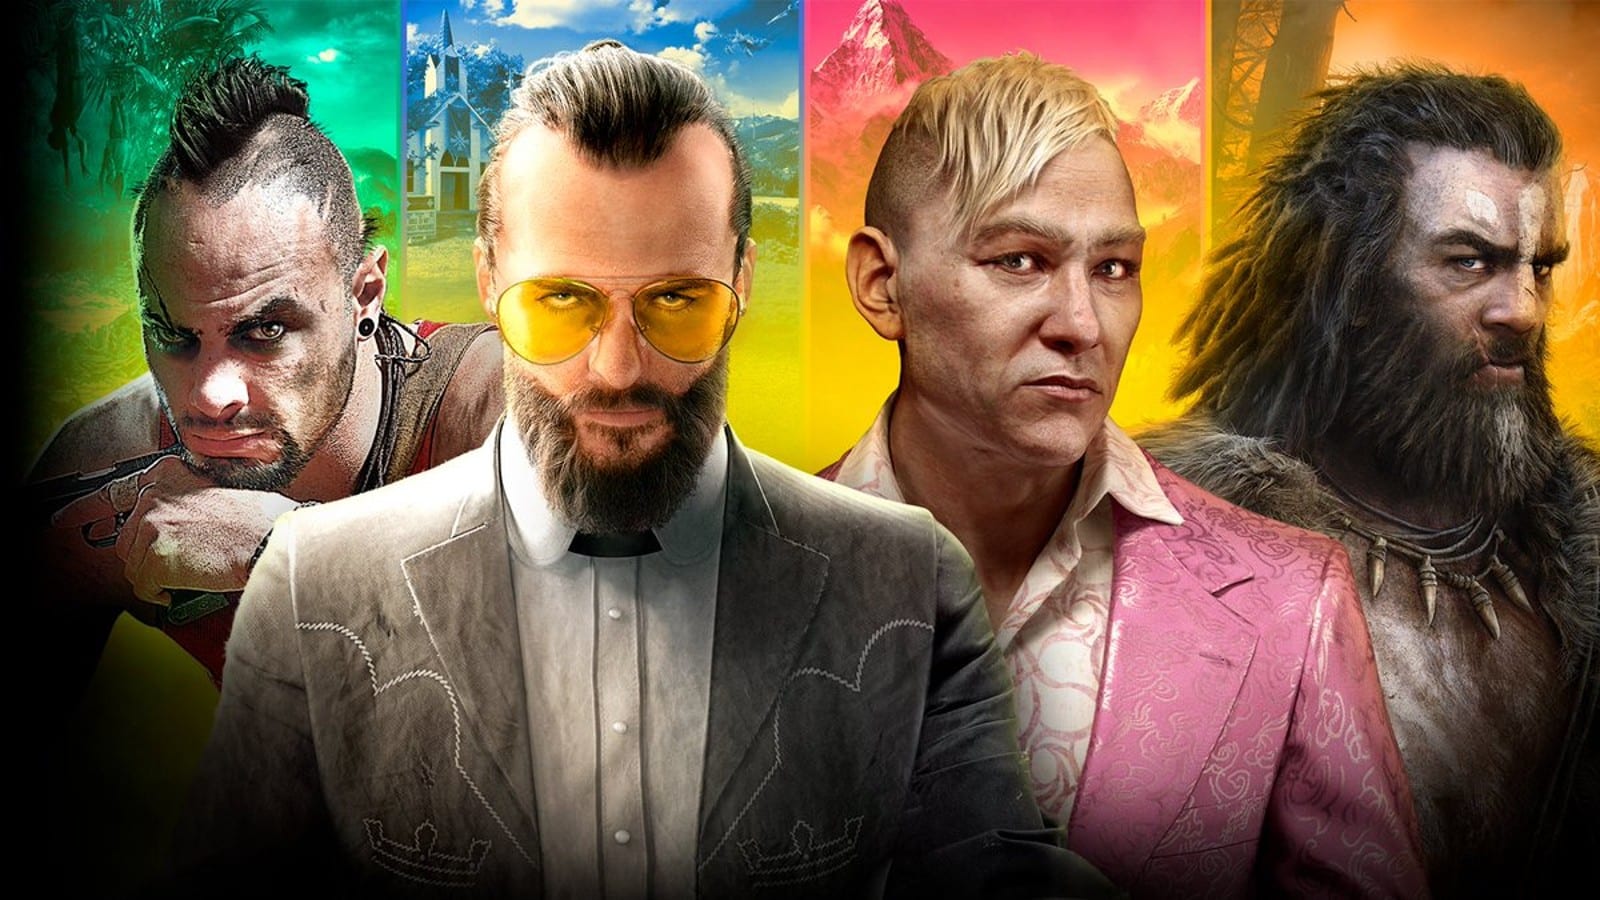 Far Cry 6' will bring back the series' best villains (if you pay more)